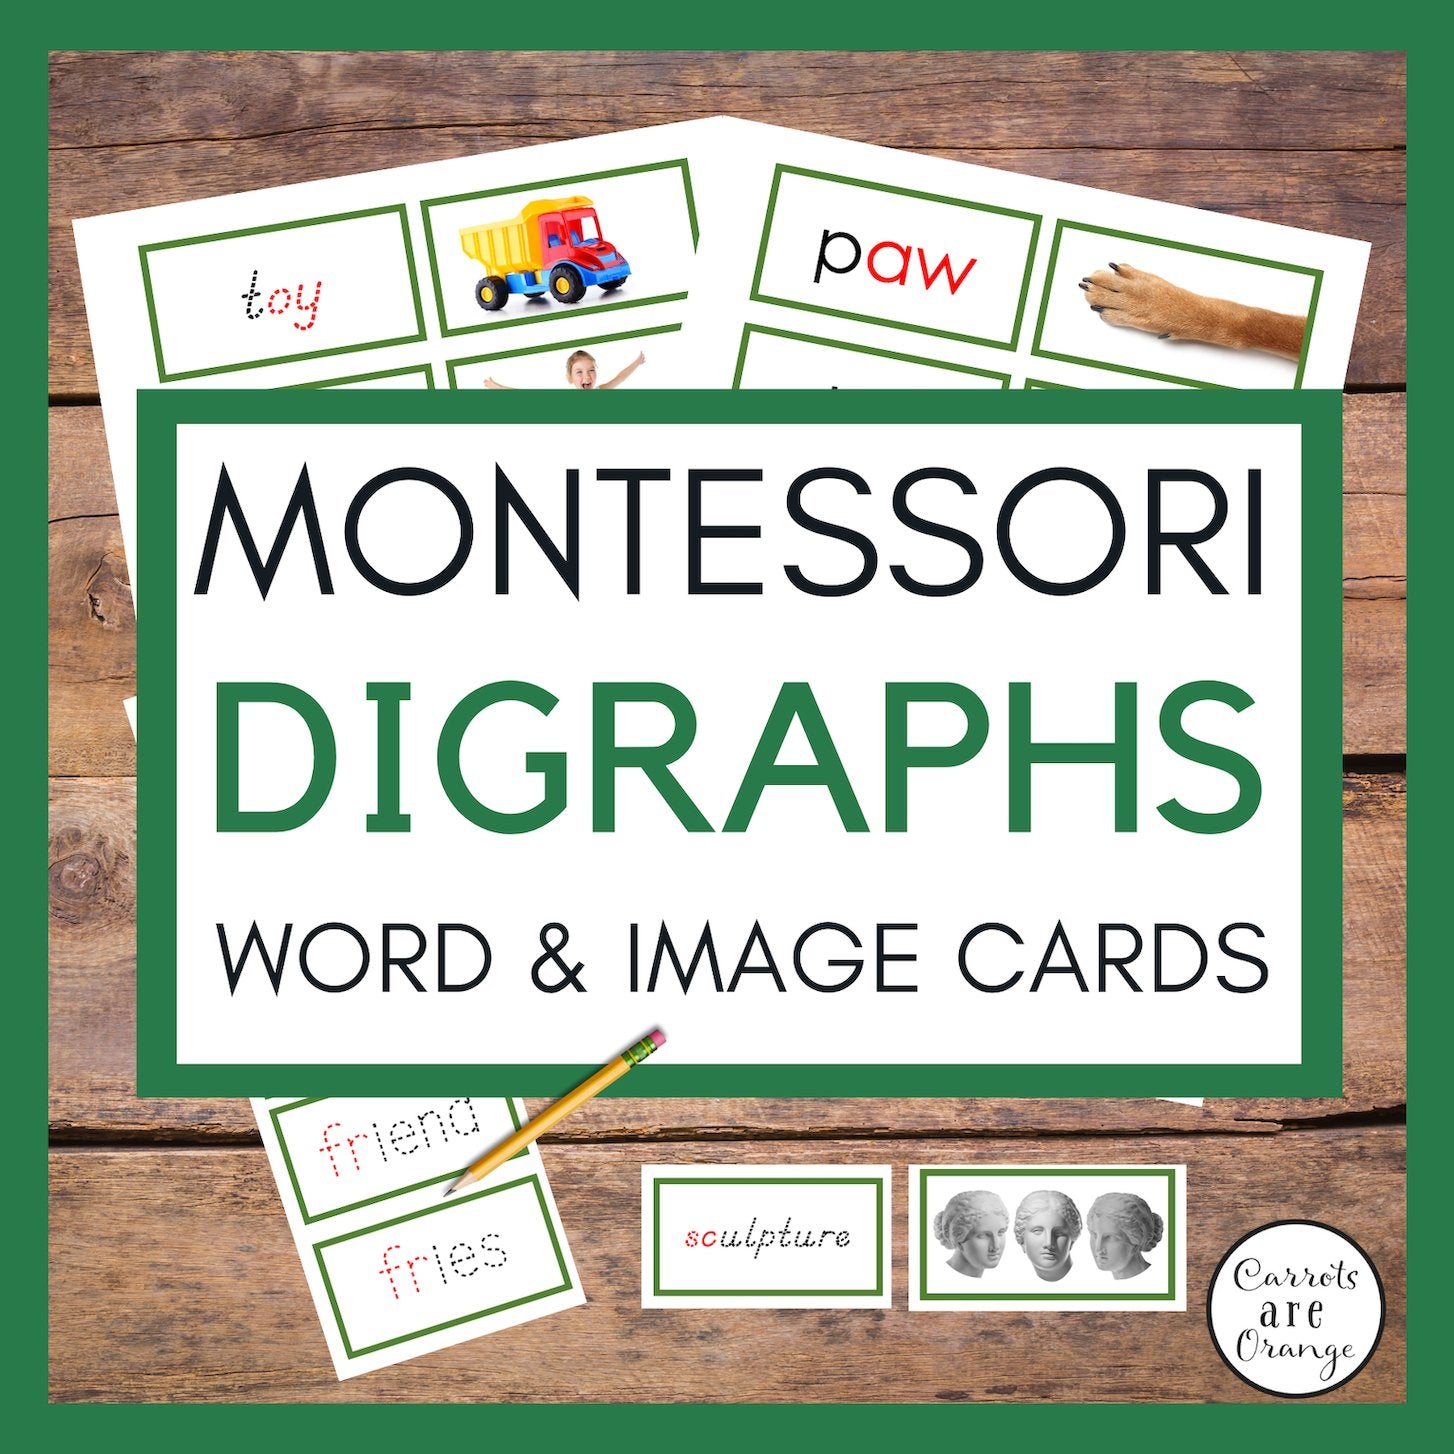 [Green Level] Digraph Word Label & Image Cards #2 - Printables by Carrots Are Orange